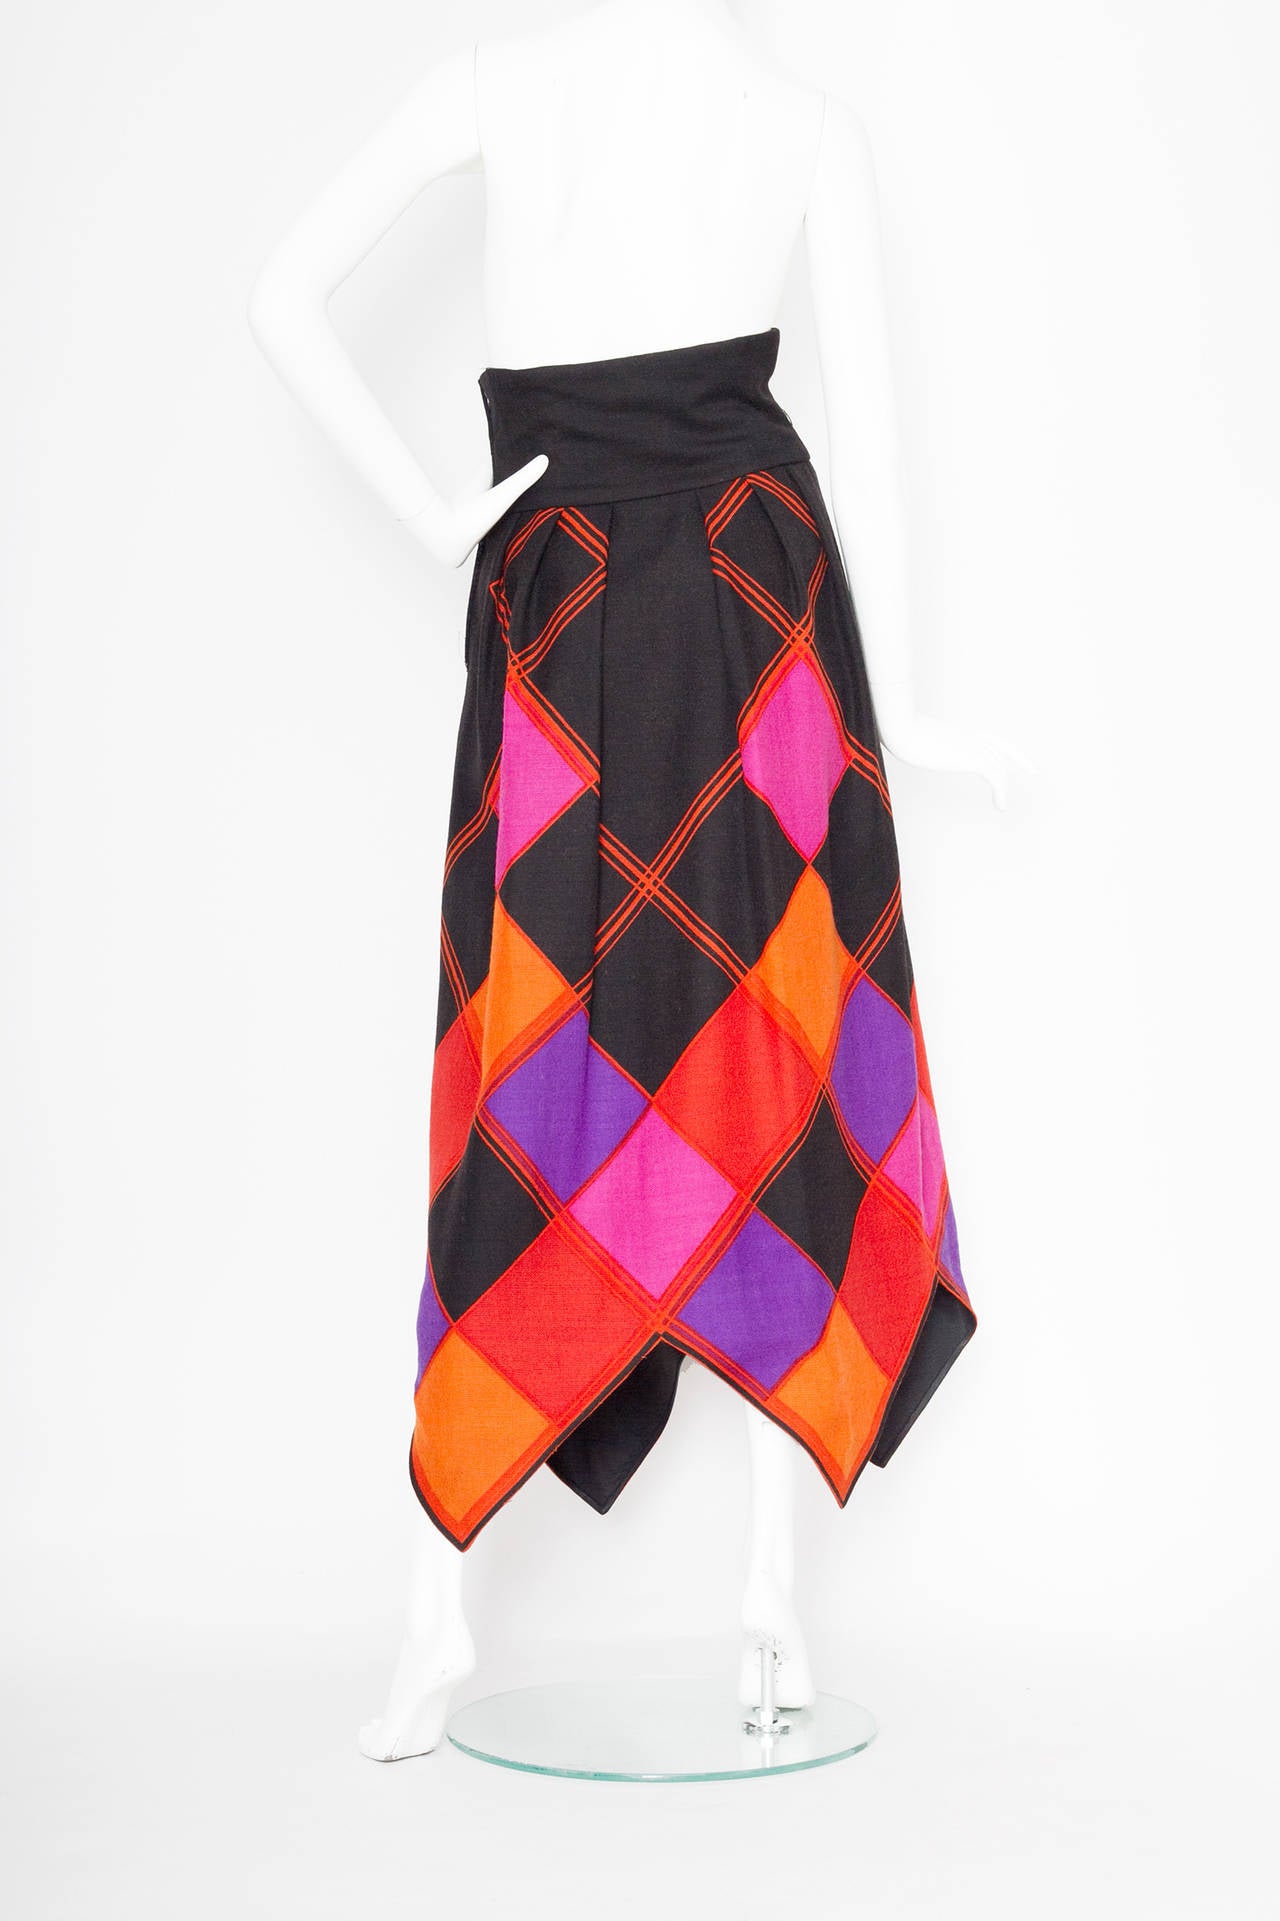 Doucmented 1971 Pierre Cardin Graphic Wool Skirt In Excellent Condition For Sale In Copenhagen, DK